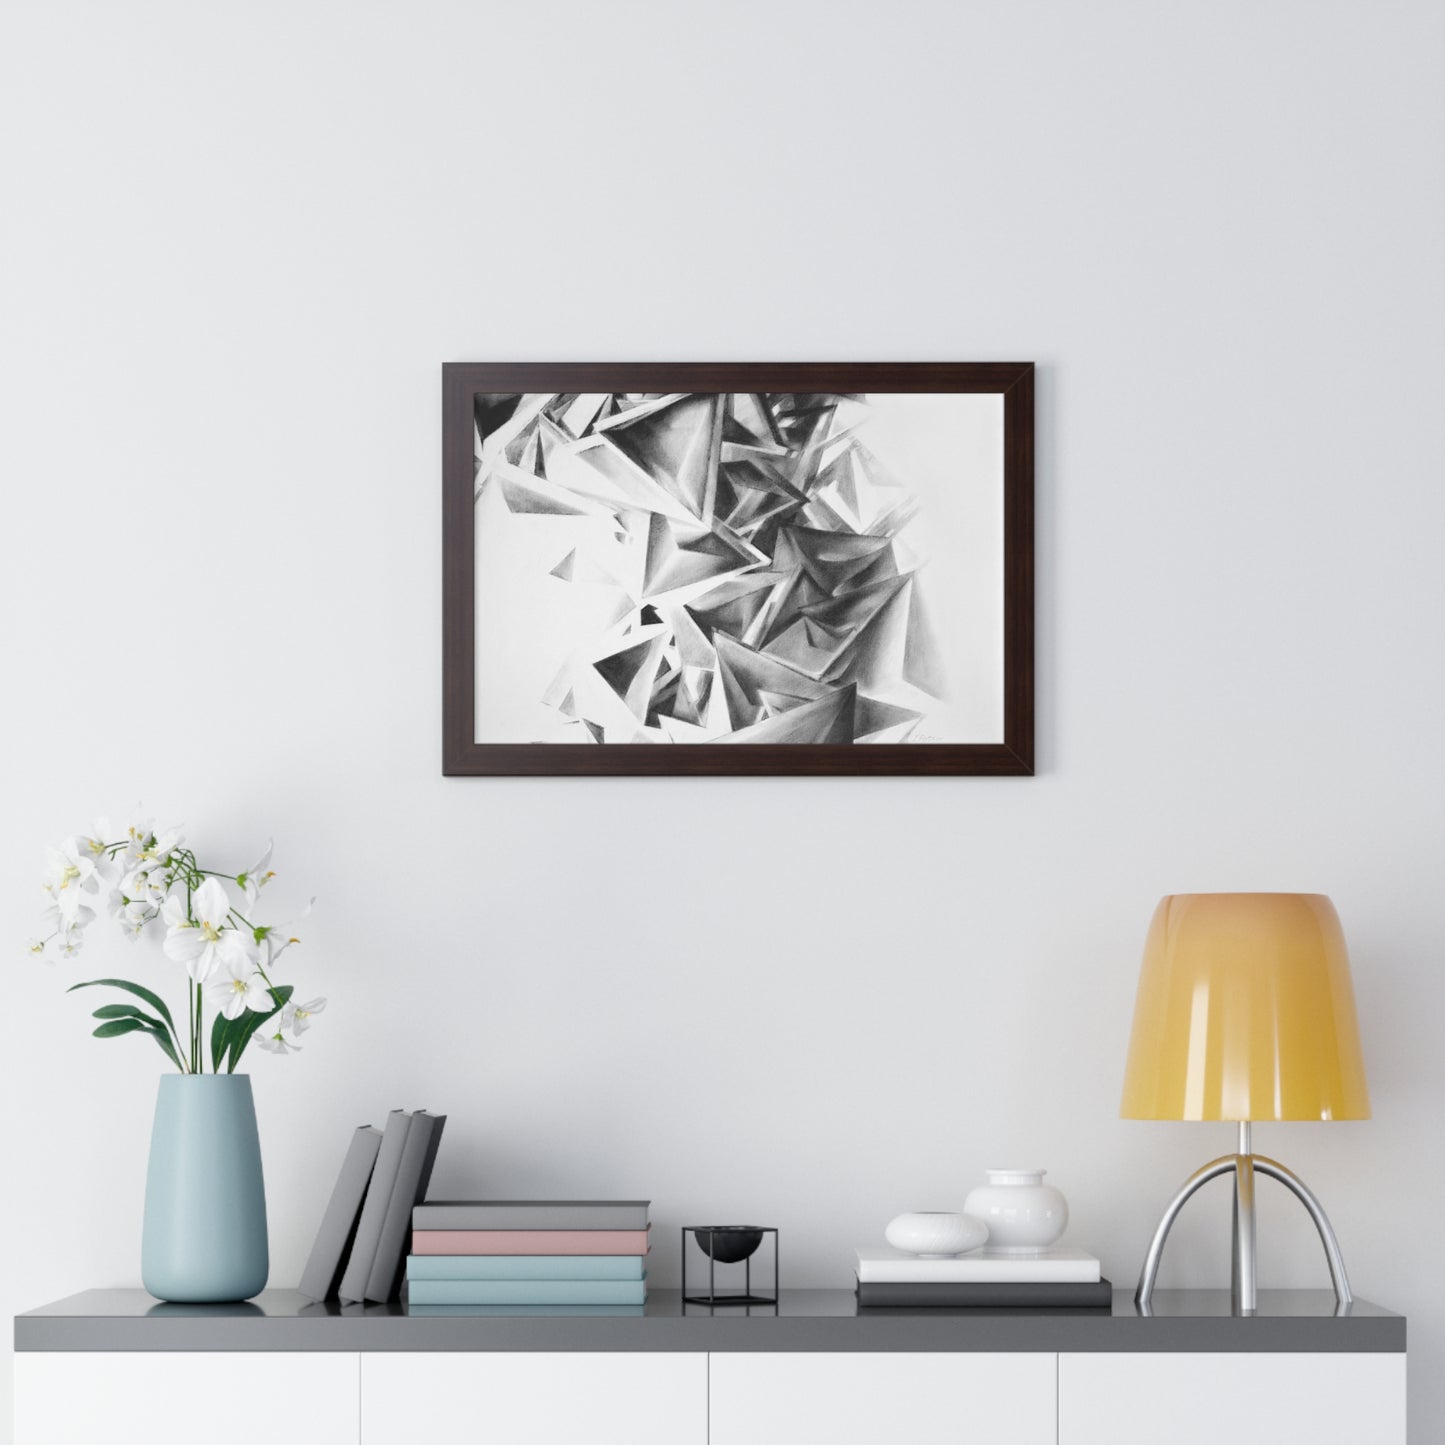 Whirlstructure II - Framed Poster Print, Wall Art, Charcoal, Abstract Black and White Decor